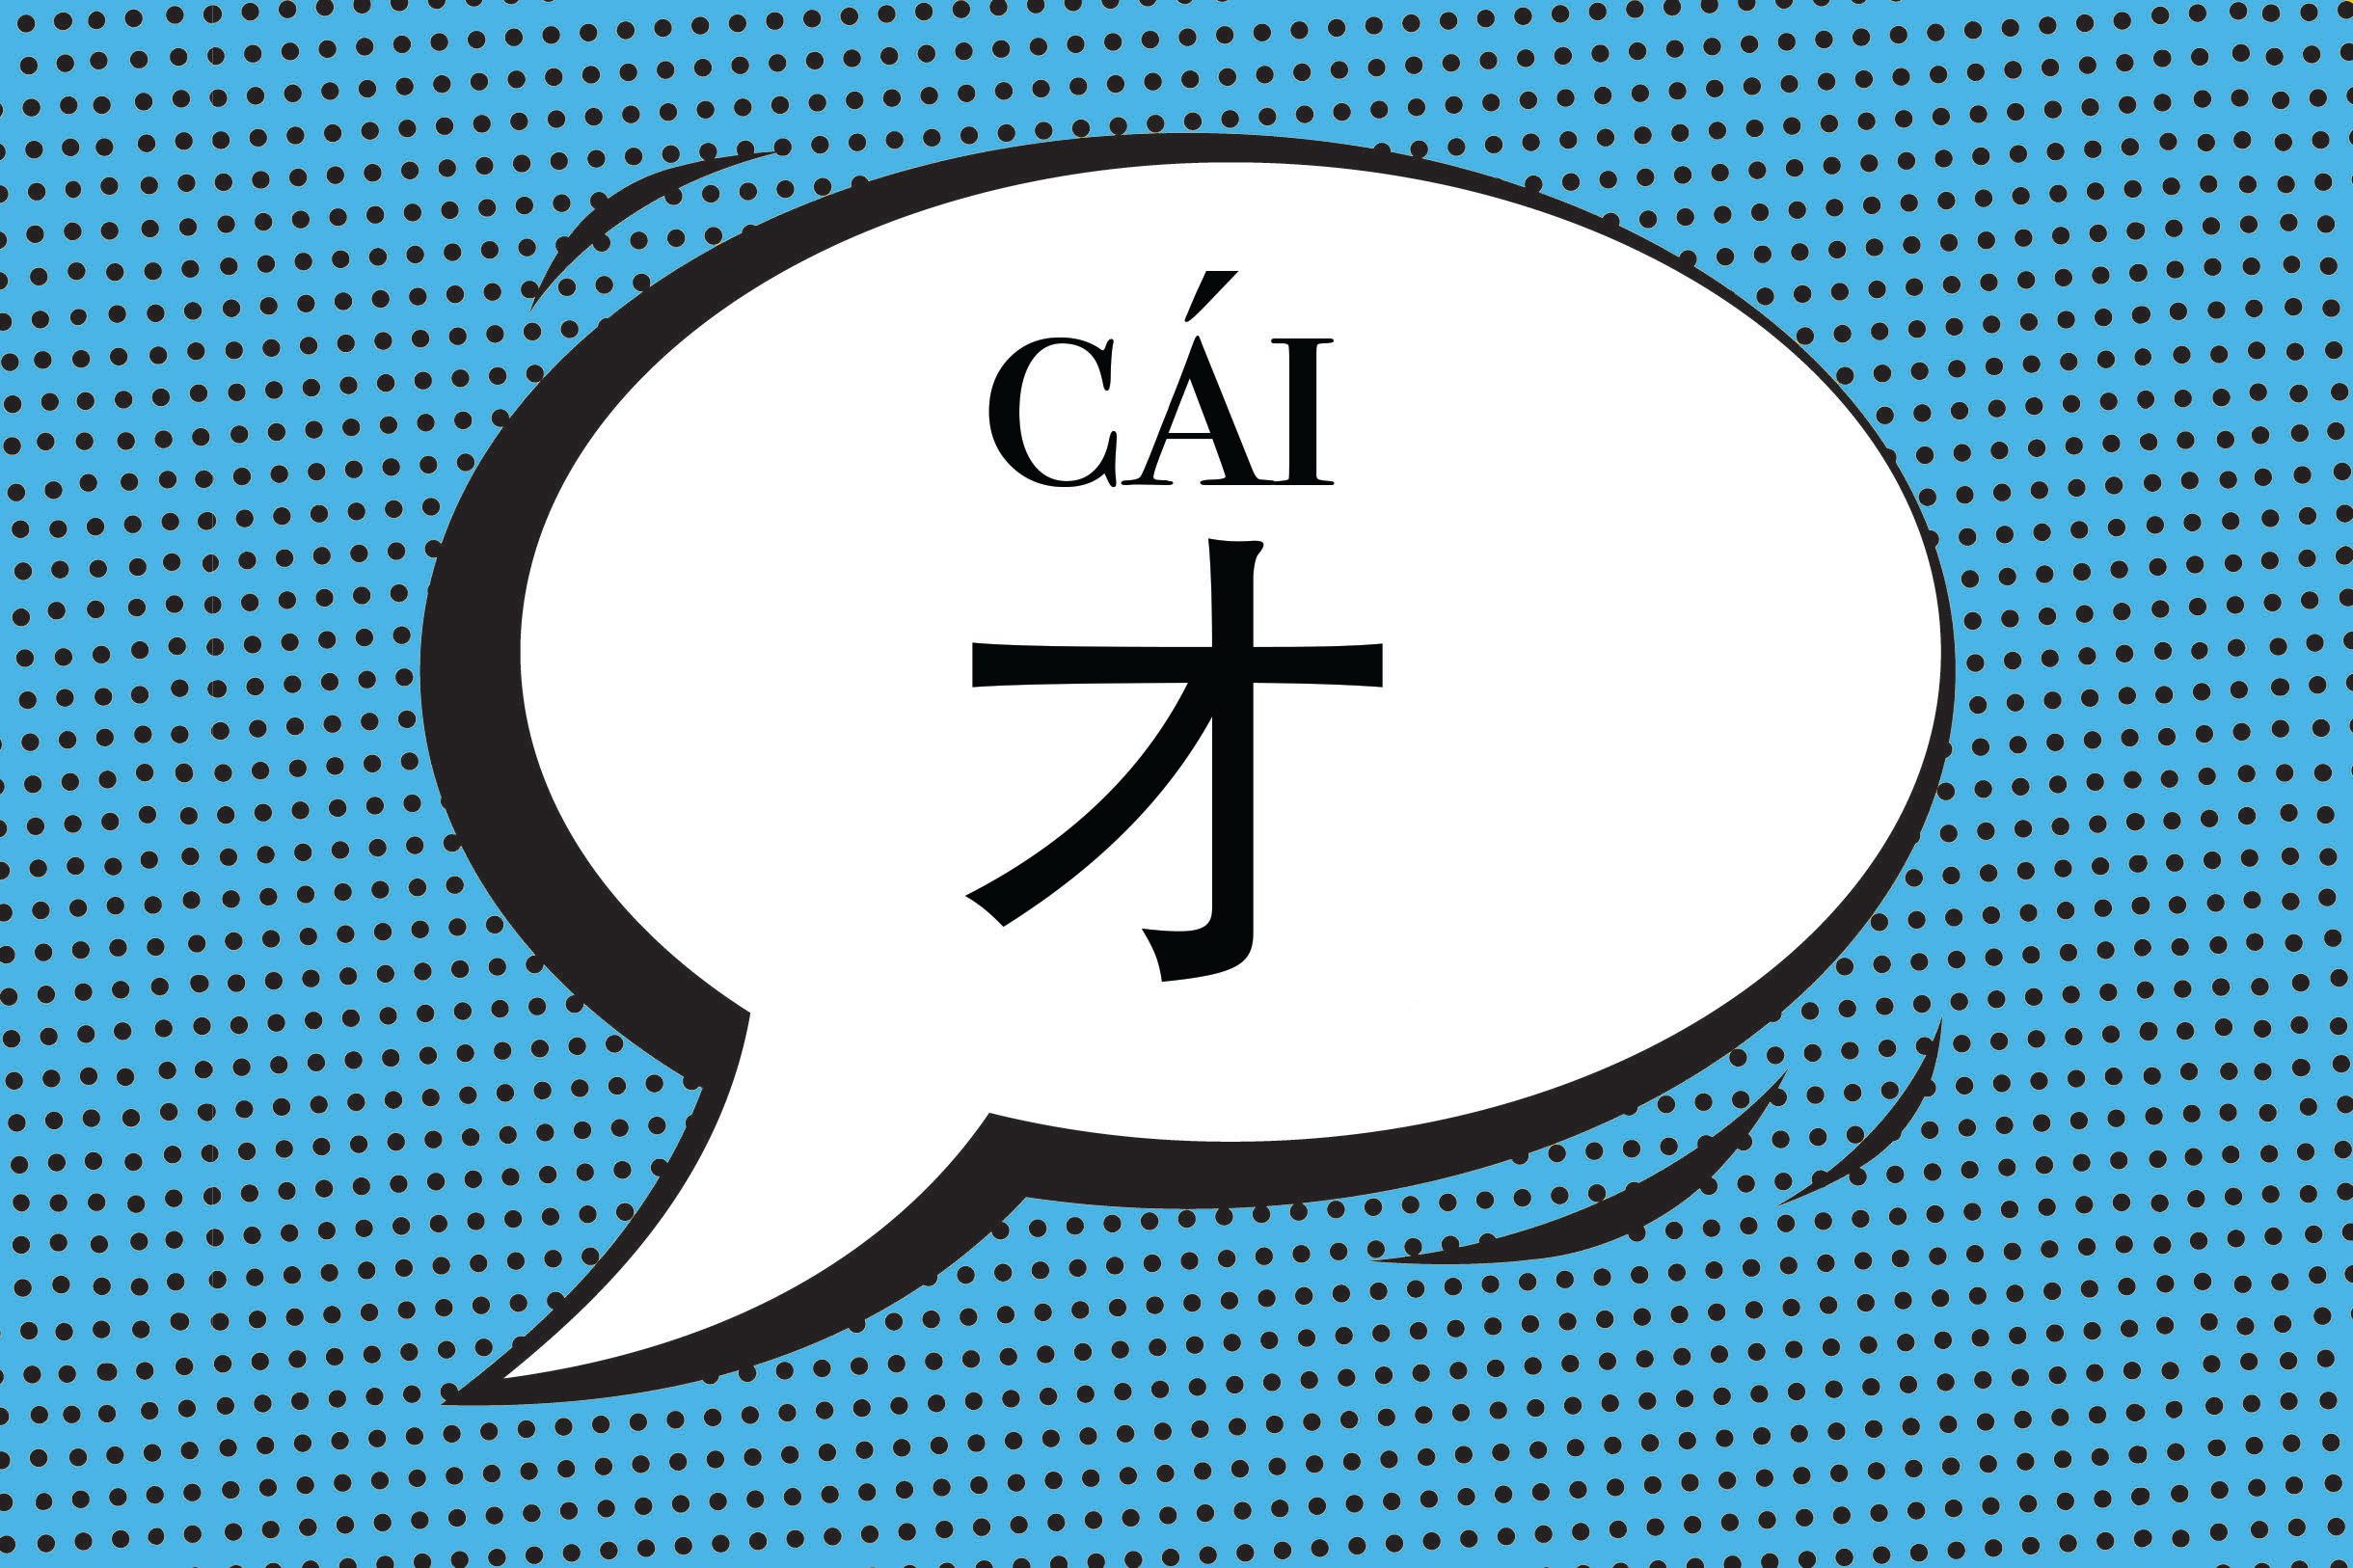 How To Use The Chinese Character "才(cài)" -Mario玛瑞欧教育官网|对外 ...